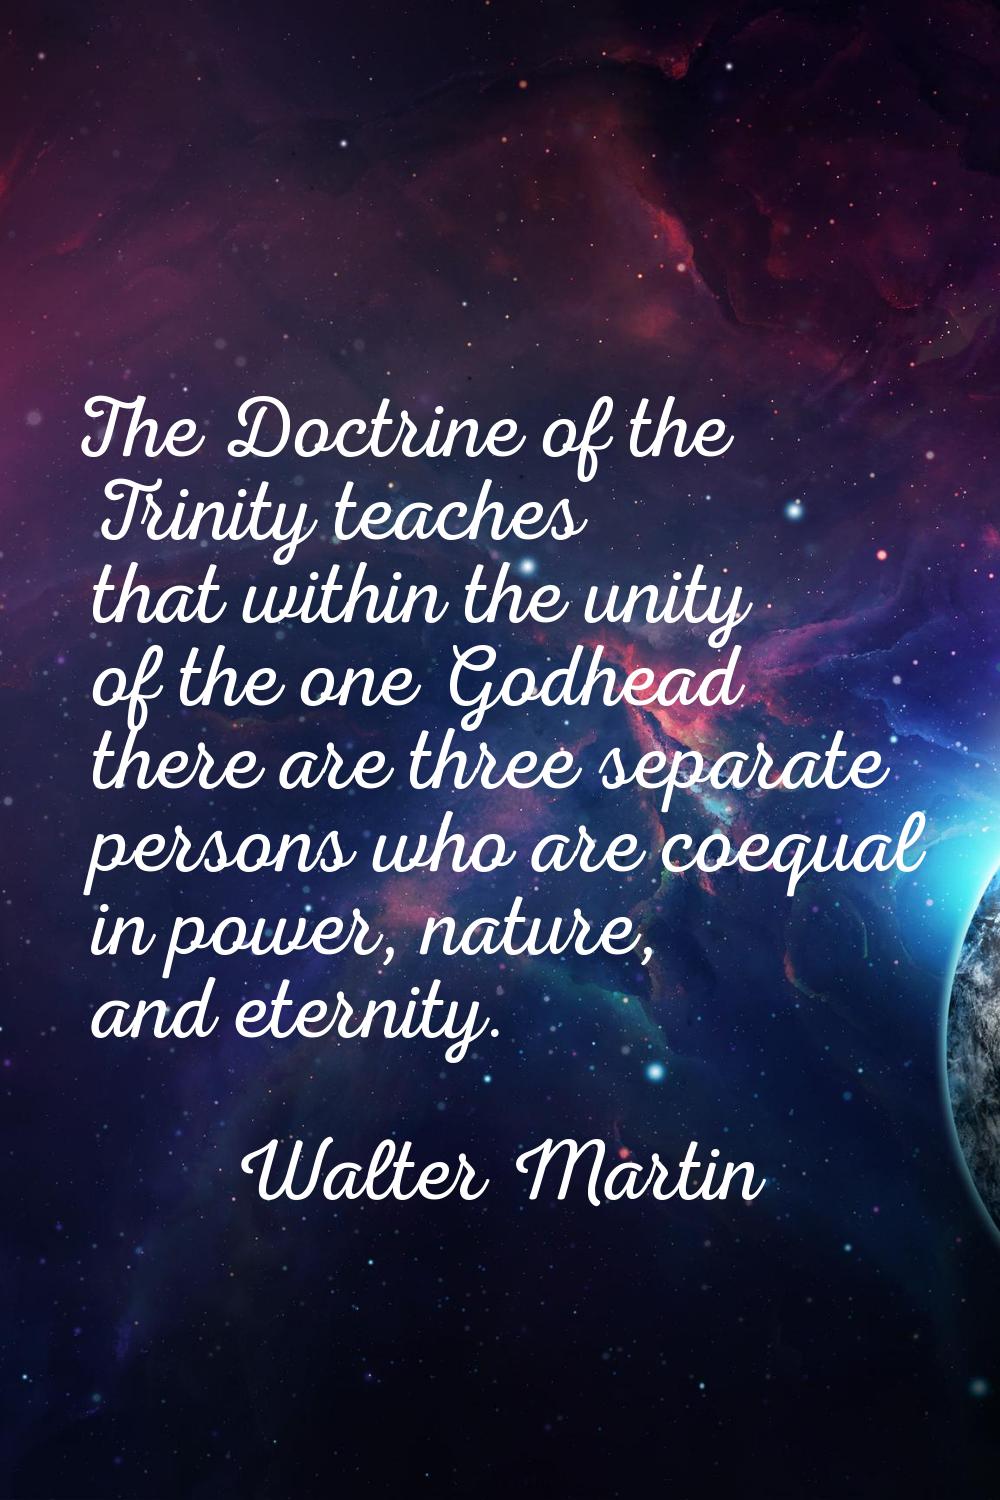 The Doctrine of the Trinity teaches that within the unity of the one Godhead there are three separa